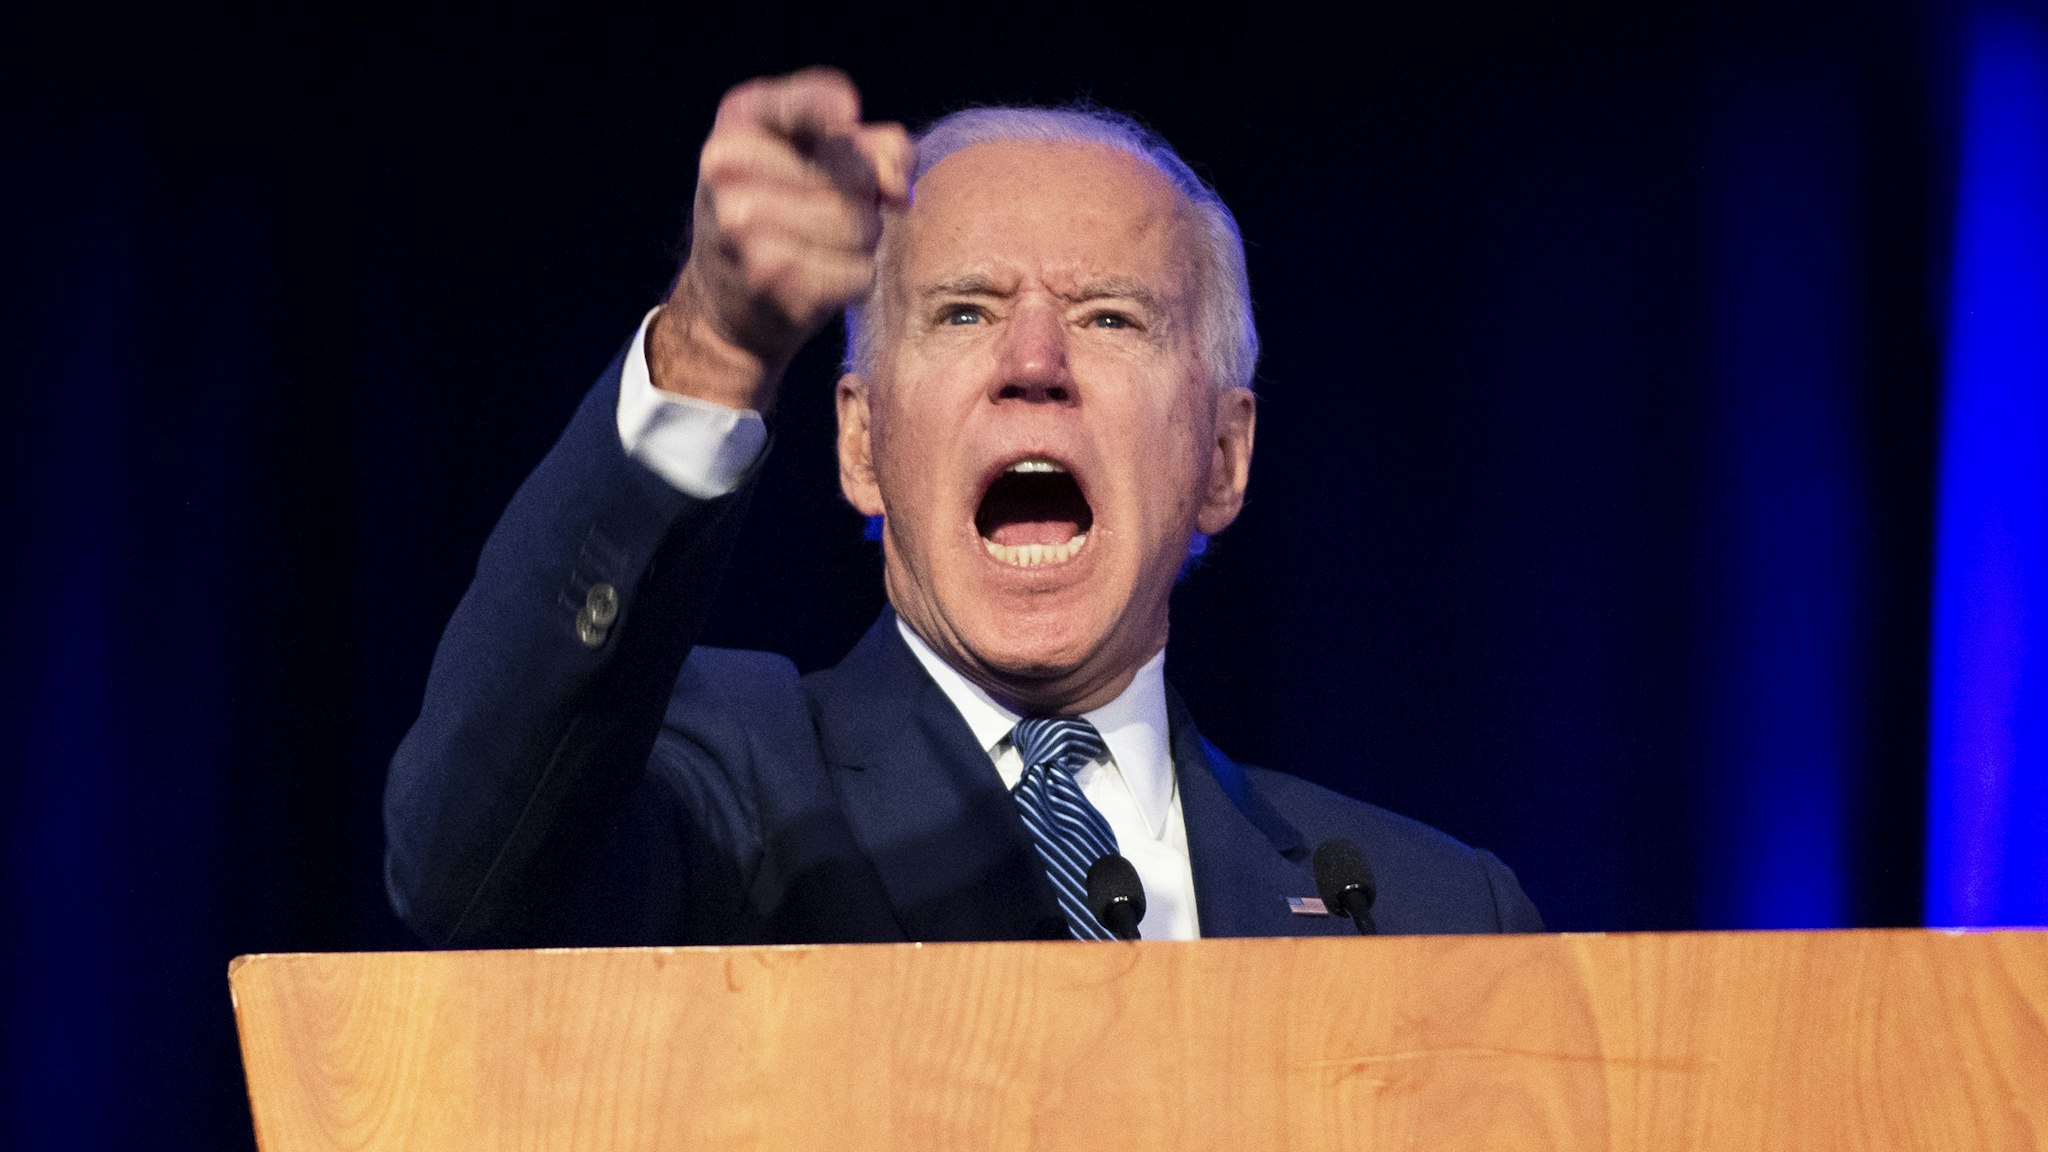 UNITED STATES - FEBRUARY 15: Democratic presidential candidate Joe Biden speaks during the Kick Off to Caucus Gala in Las Vegas on Saturday, Feb. 15, 2020.